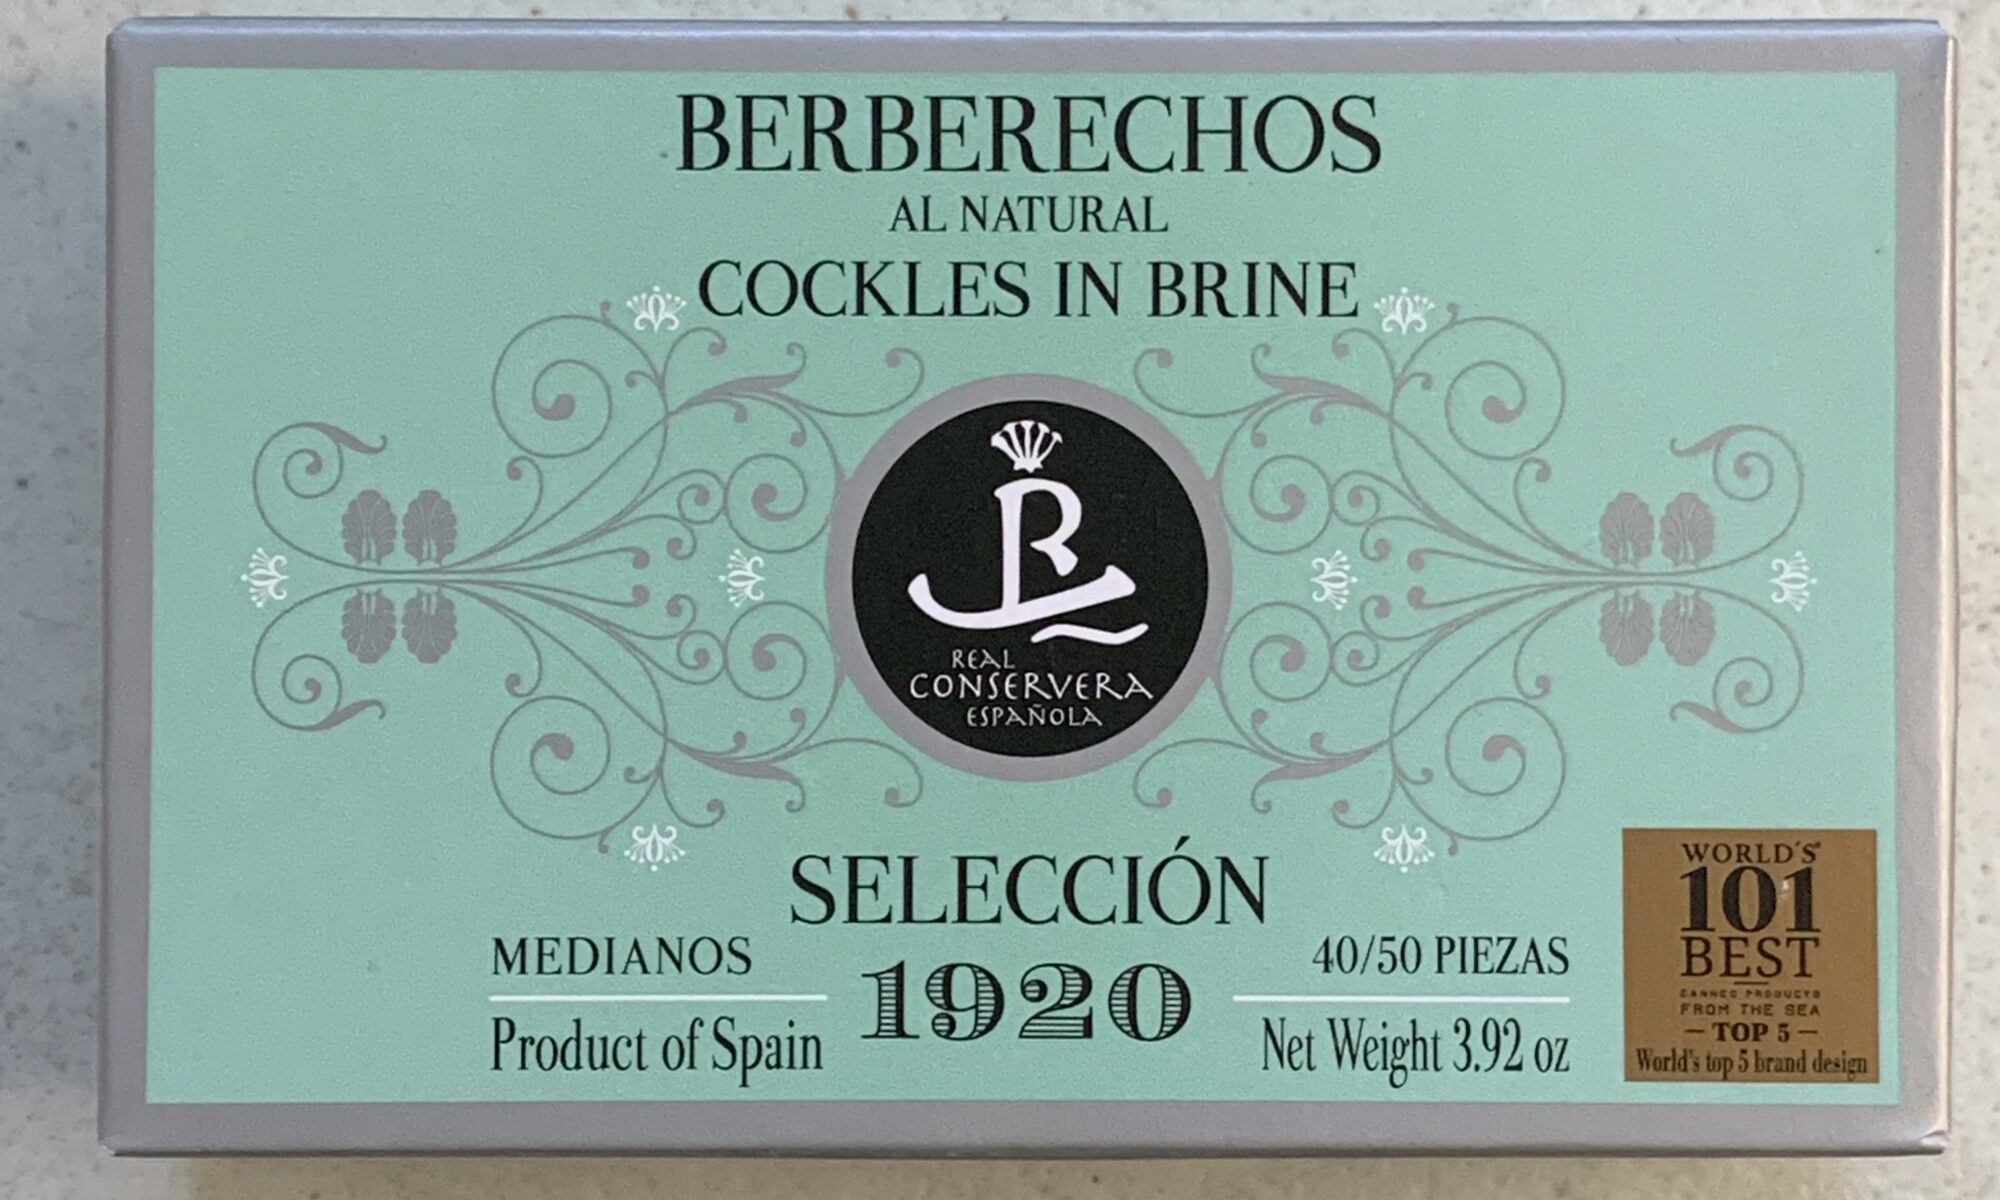 Image of the front of a package of Real Conservera Selección 1920 Cockles in Brine 40/50